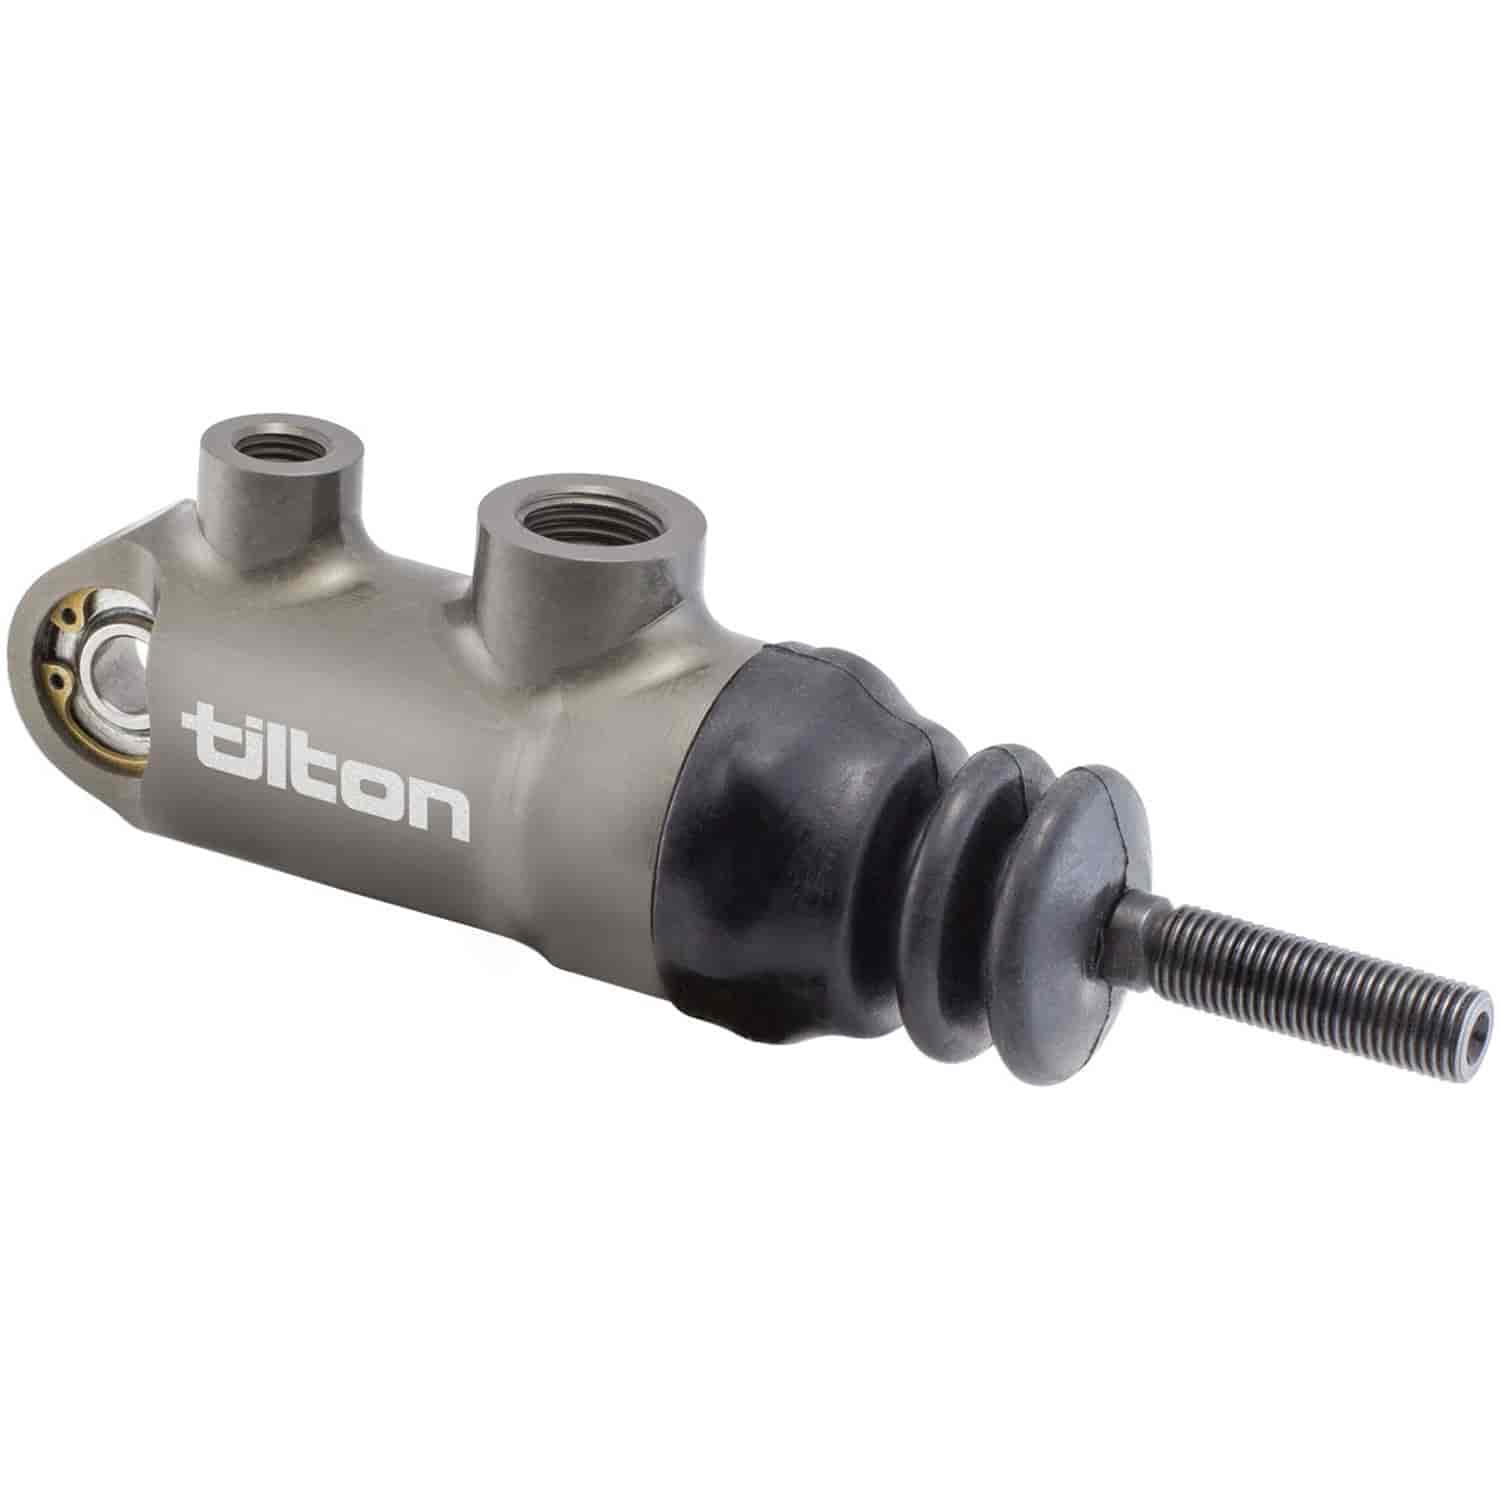 78-Series Master Cylinder 3/4" Bore